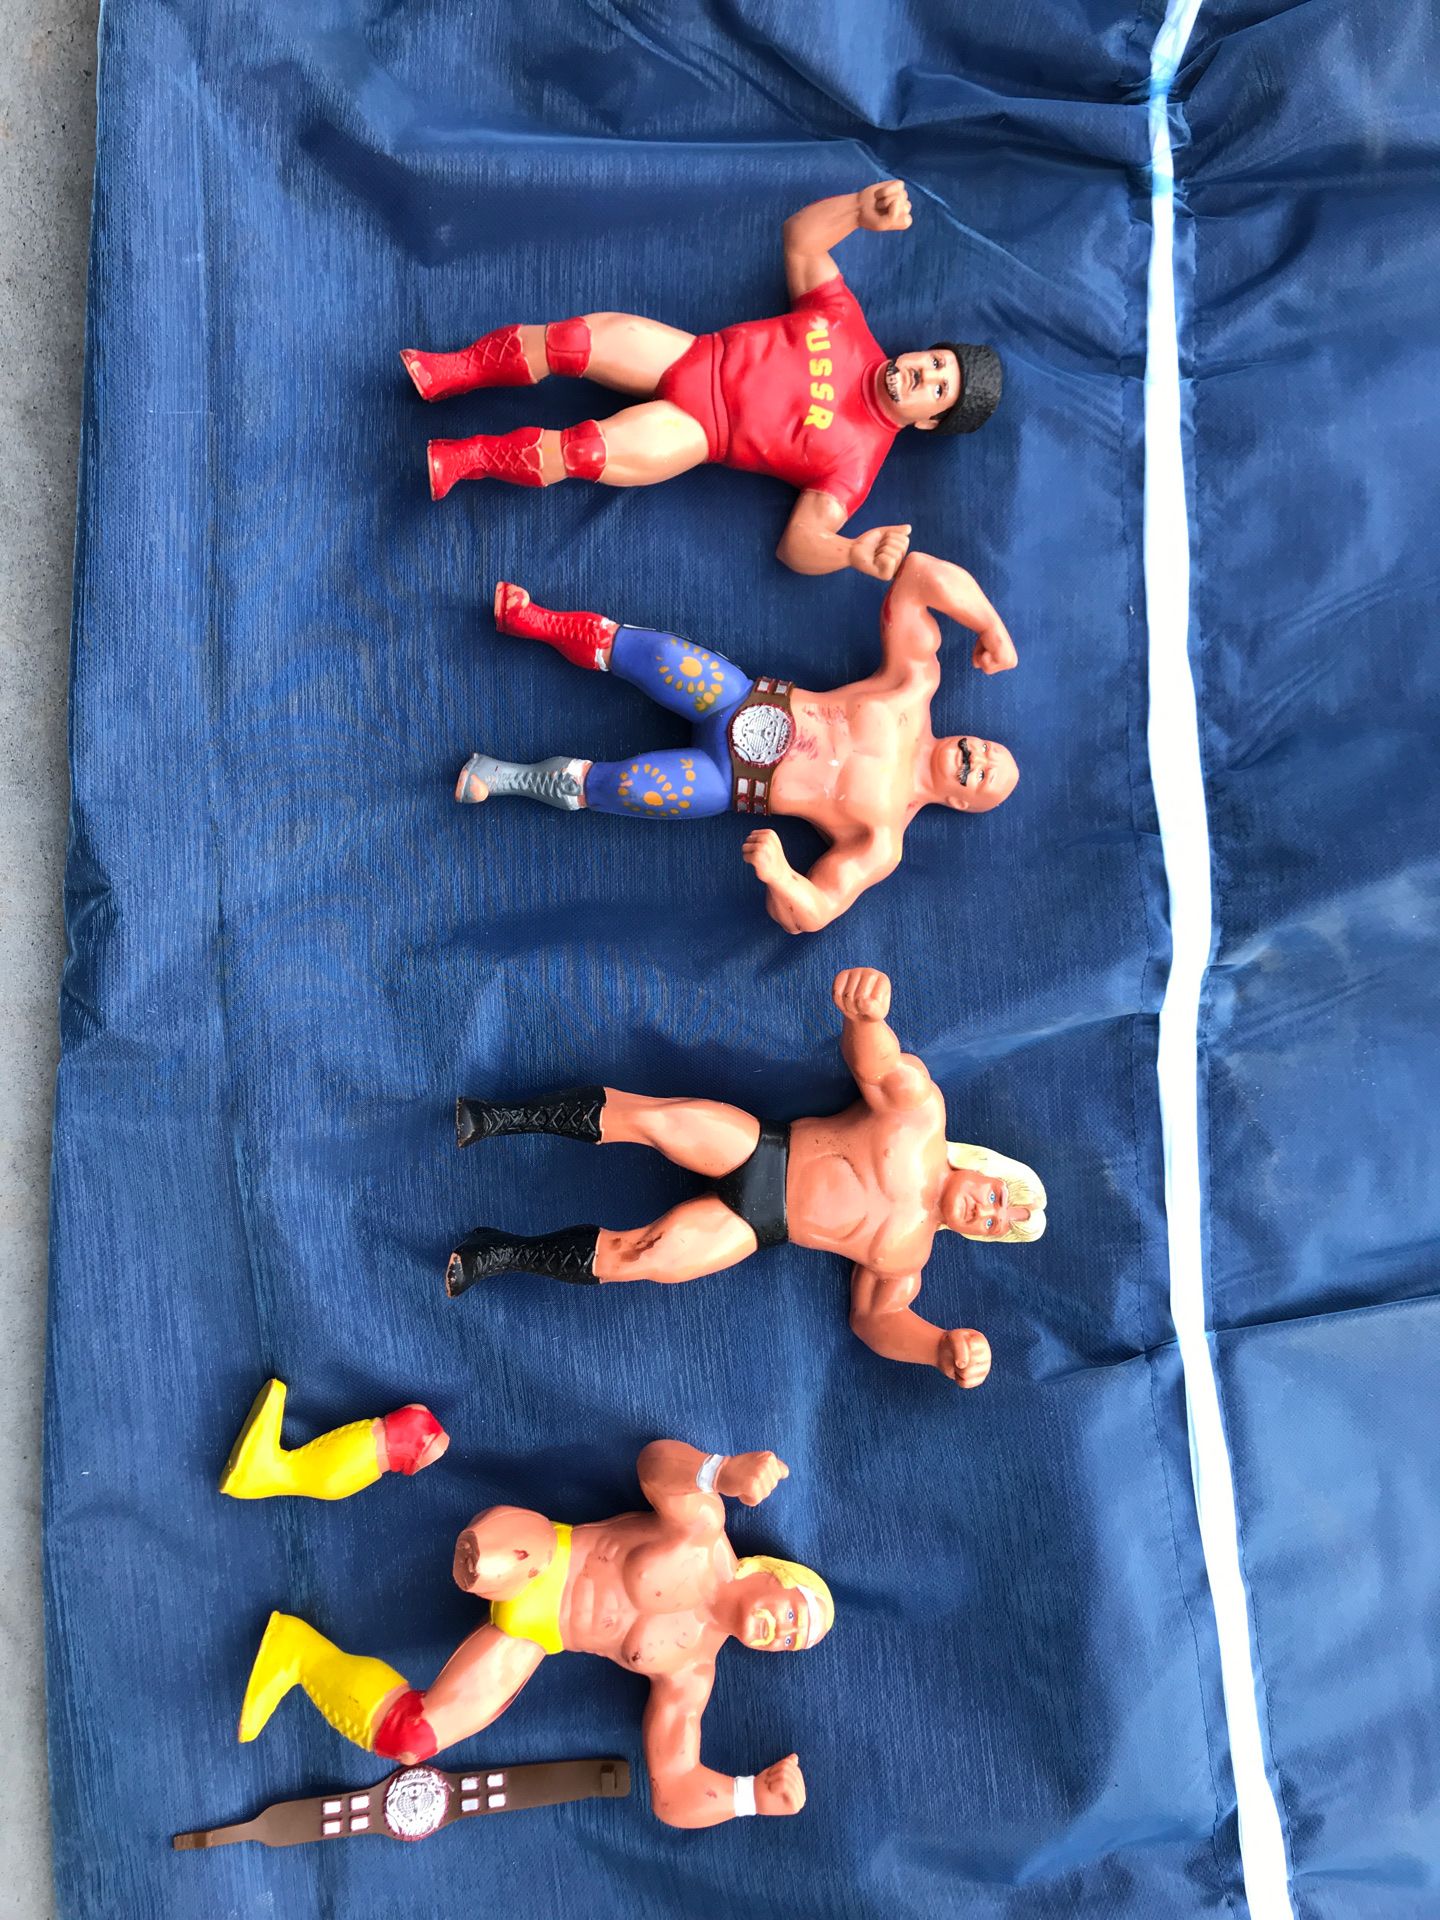 WWF rubber toy figures